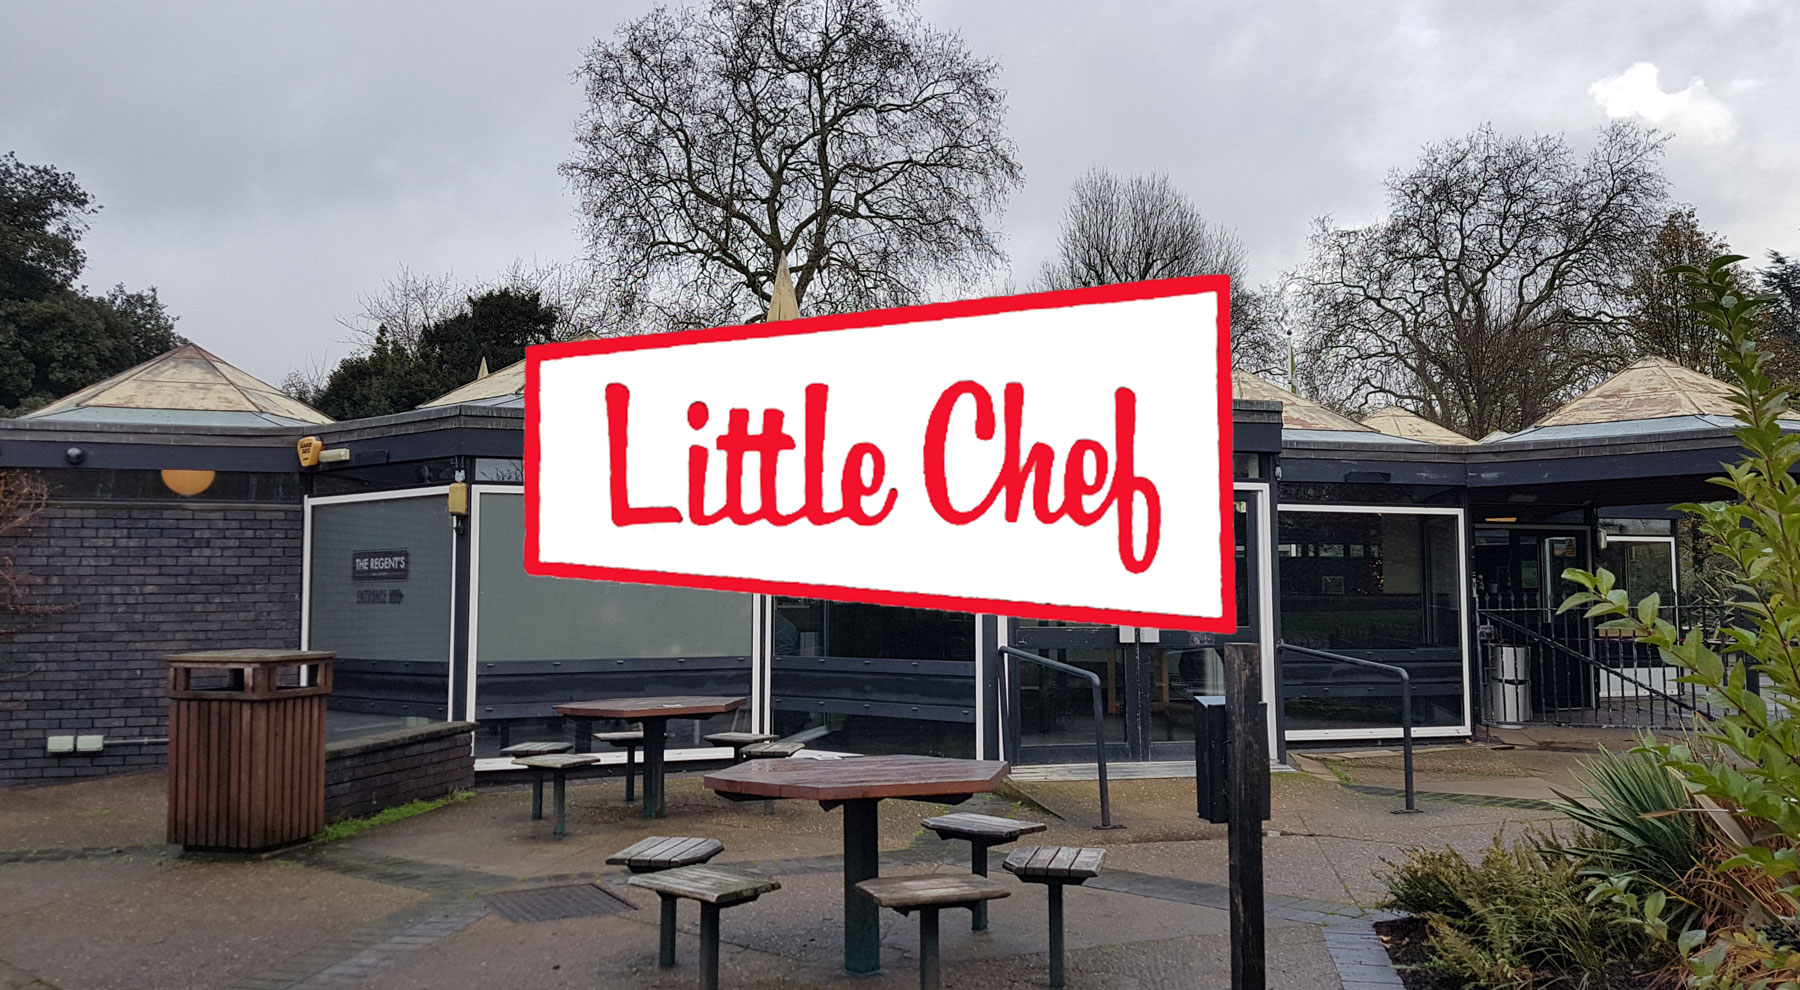 The year Little Chef opened a cafe in Regent's Park